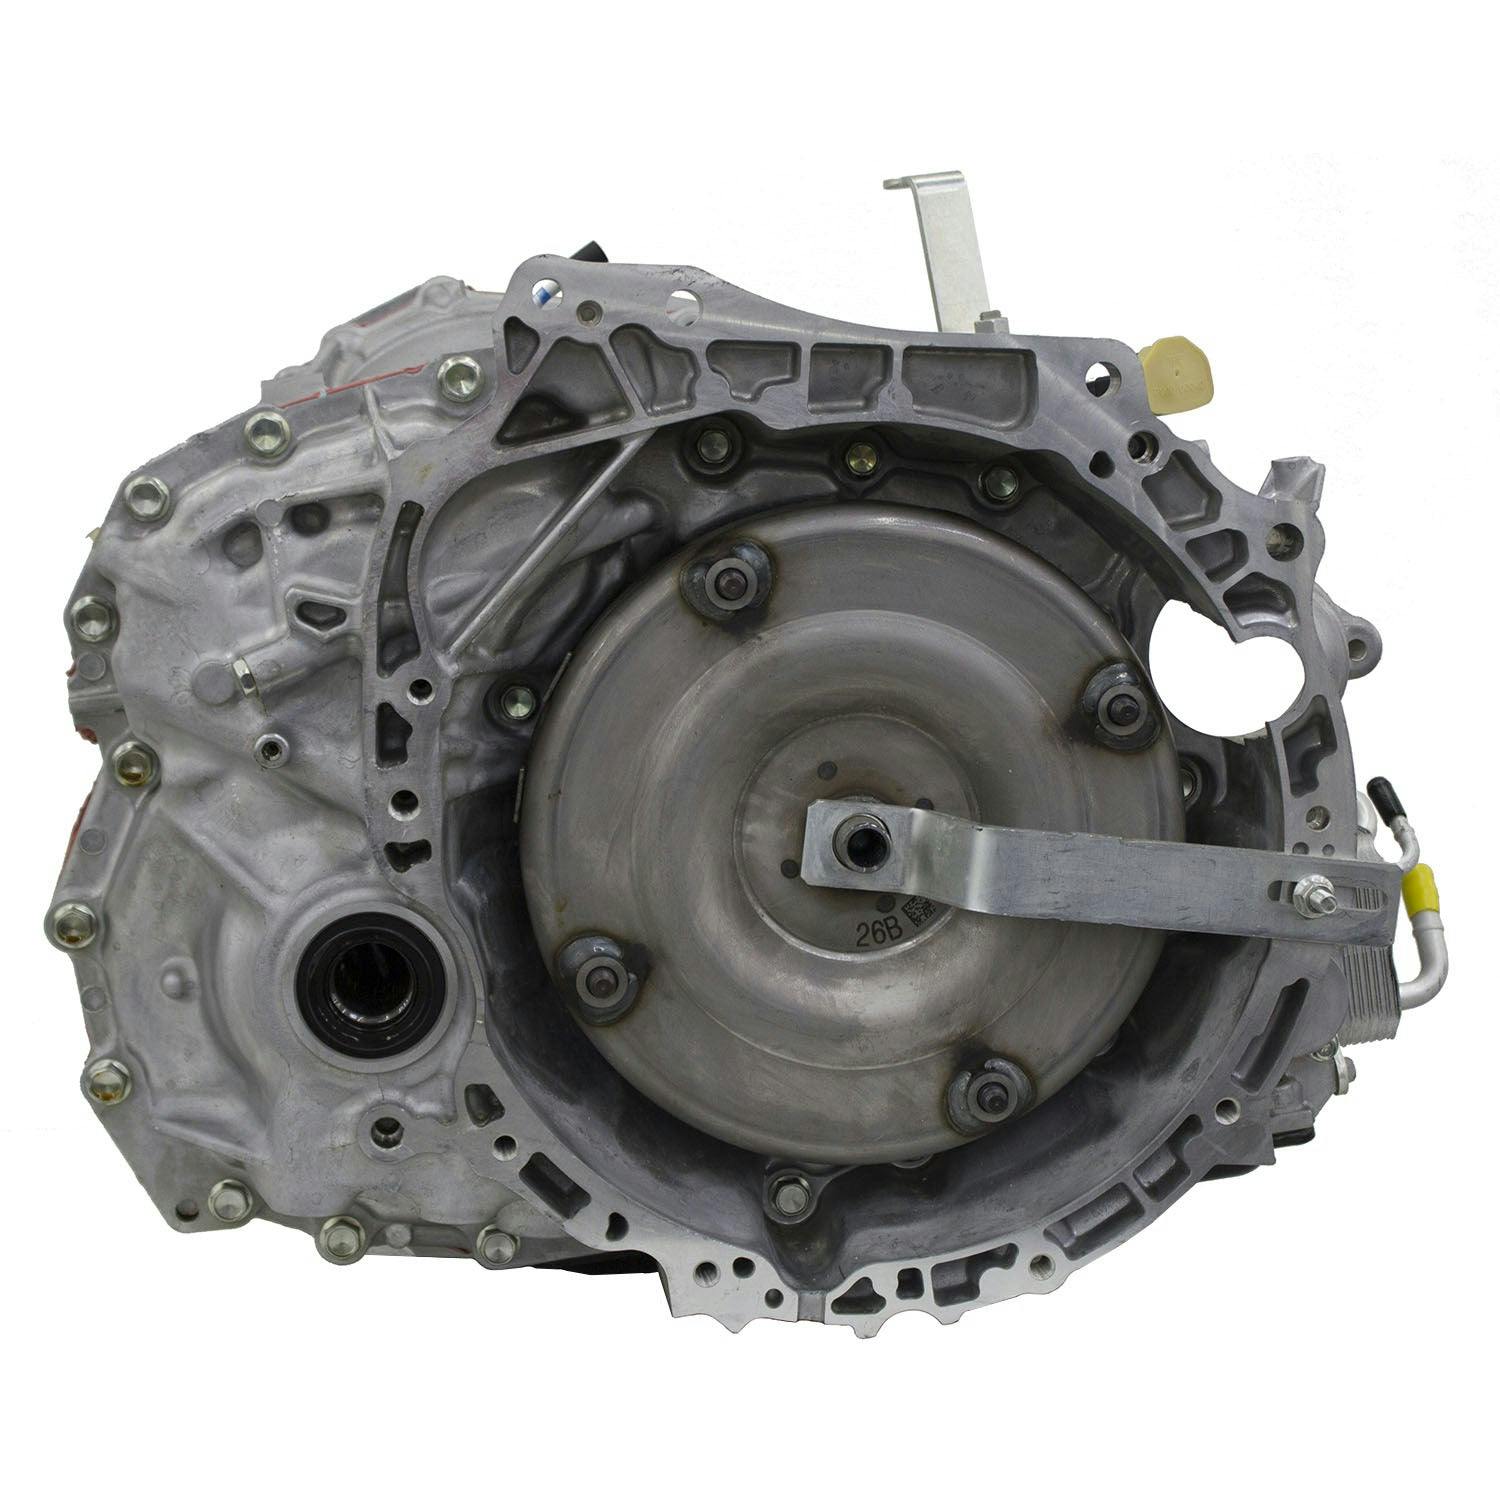 Automatic Transmission for 2007-2009 Nissan Sentra FWD with 2.5L Inline-4 Engine